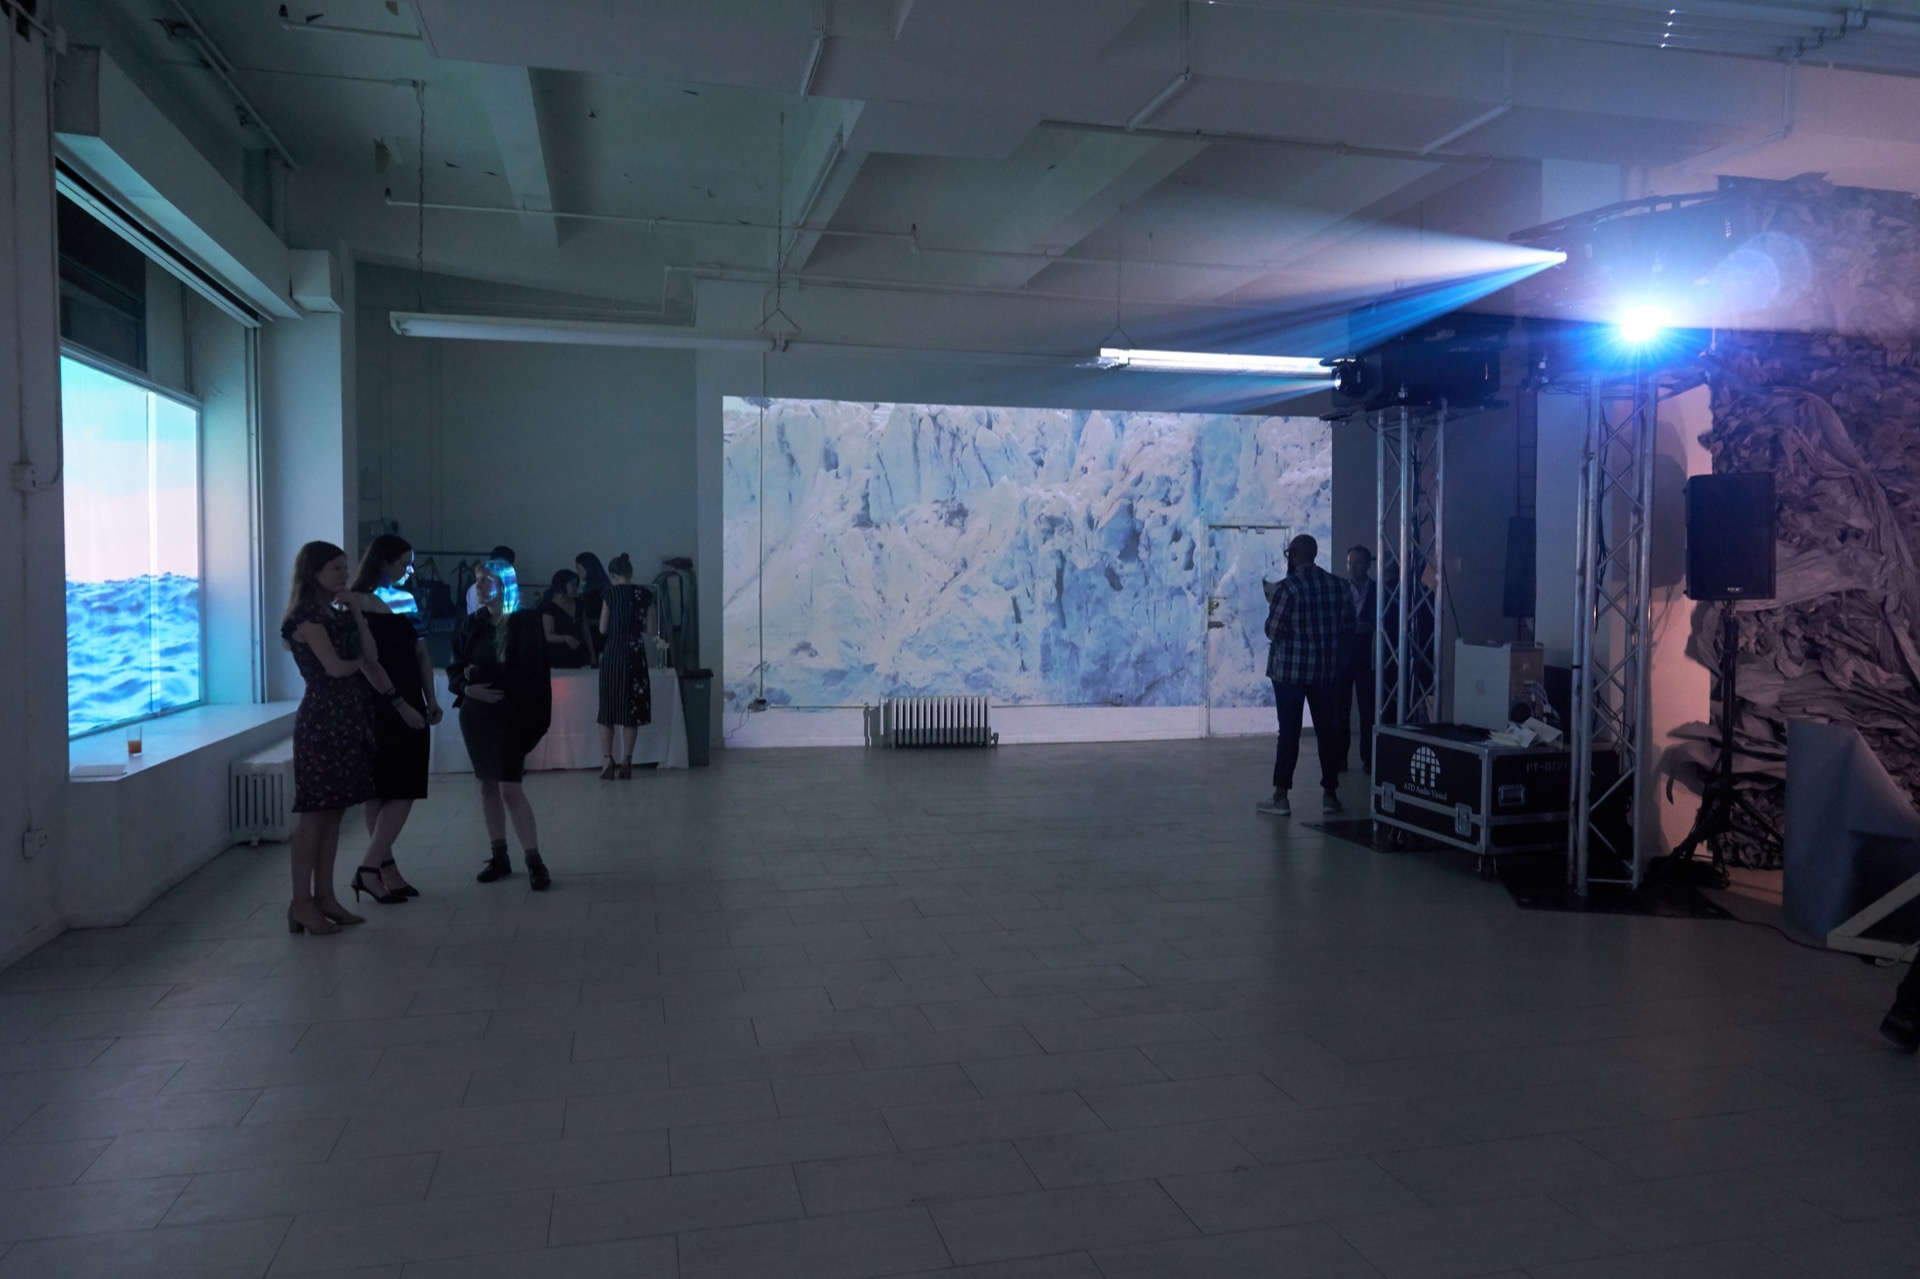 Small thumbnail image of Wide shot of the inside of a gallery showing two different projected works. On the left, an image of a body of water is projected into the gallery windows. Straight back, an image of an Arctic scene—close up of a glacier—is projected. There are about a dozen people in cocktail attire milling about. On the right, a two sharply bright lights are emanating from the lens of large projectors.